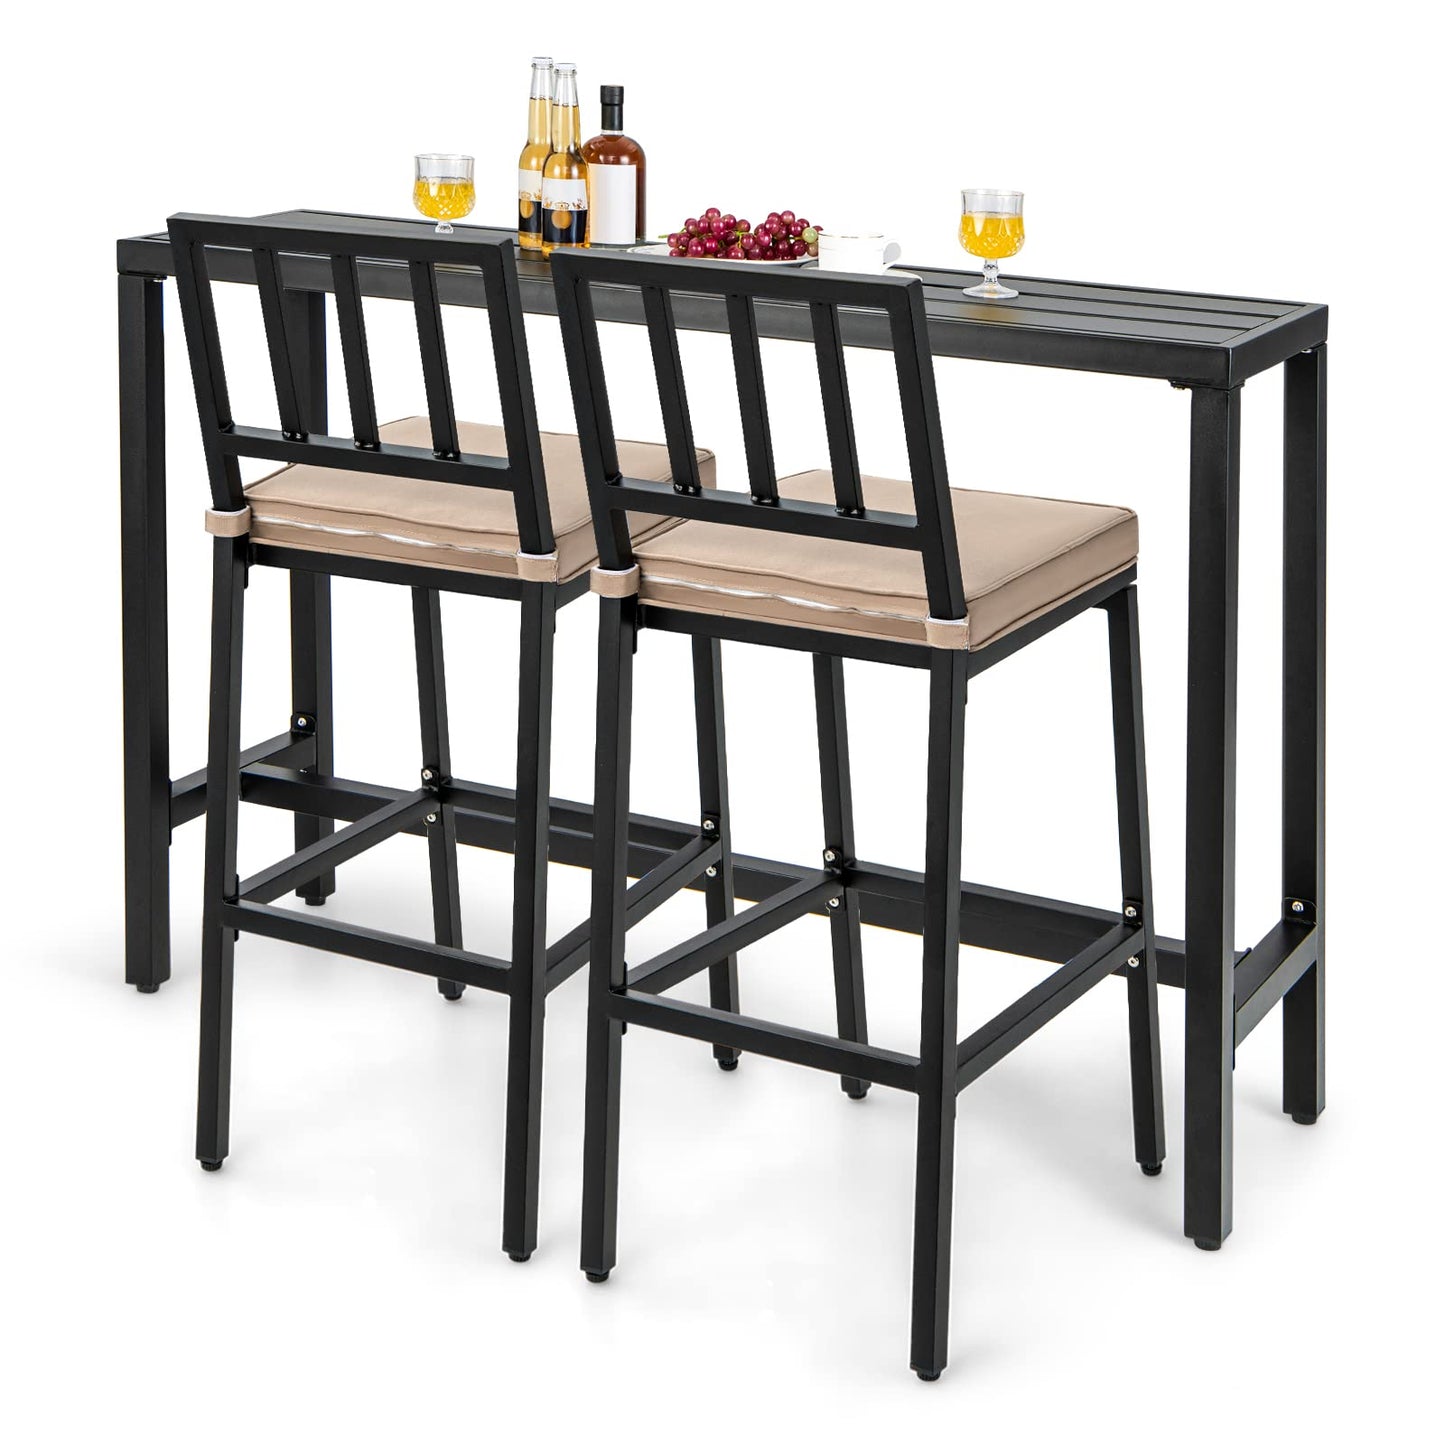 COSTWAY 3 Piece Outdoor Patio Bar Set, 55" Rectangular Pub Height High Top Bar Table with 2 Cushioned Bar Stools, Metal Bar Table and Chairs Set for Balcony, Backyard, Porch